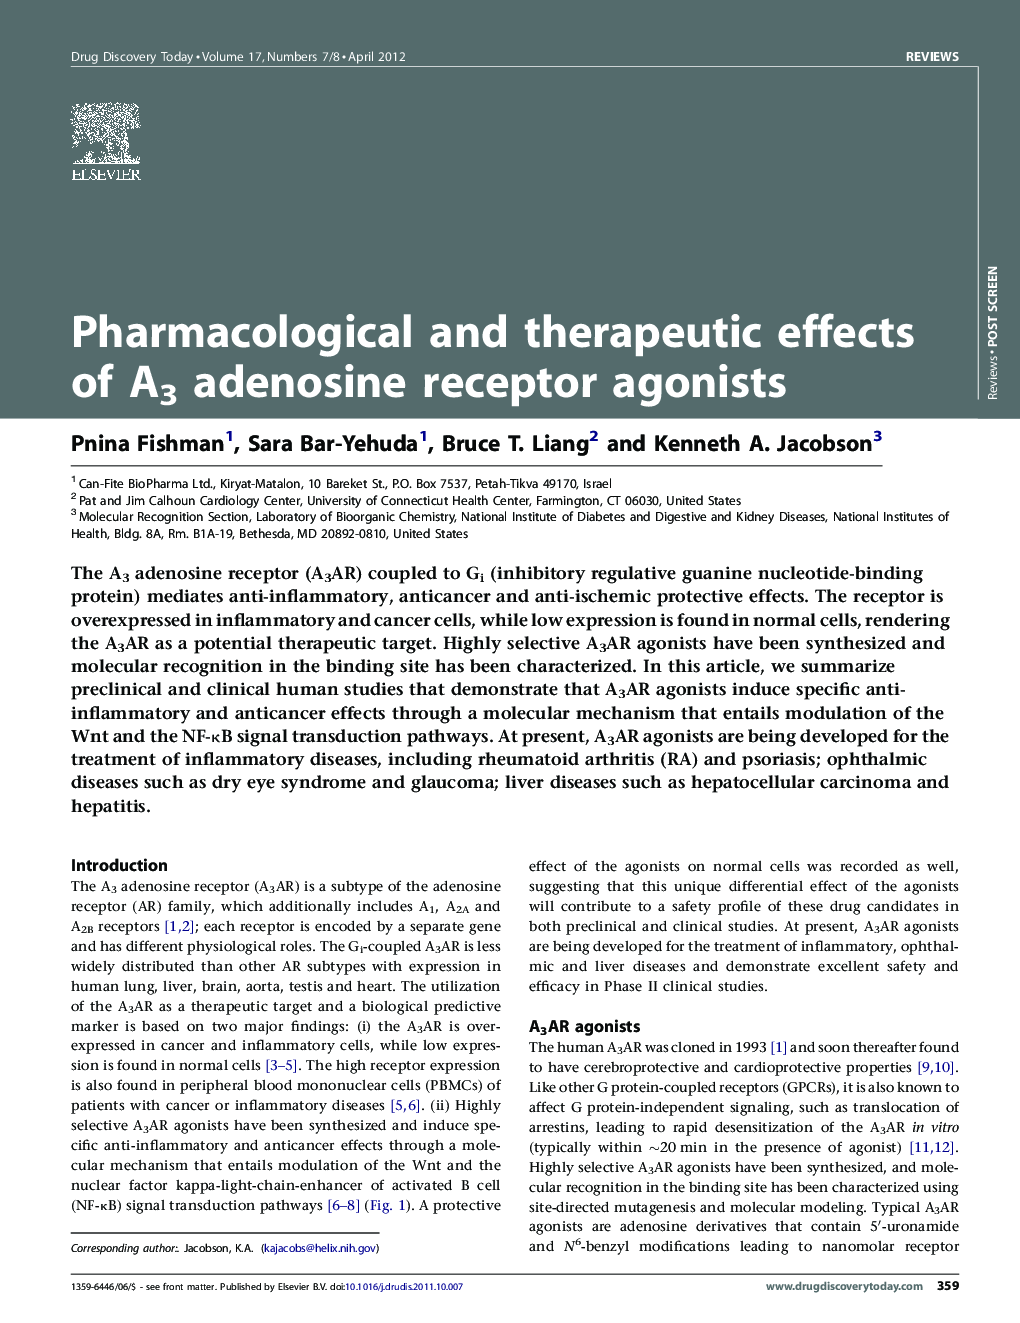 Pharmacological and therapeutic effects of A3 adenosine receptor agonists